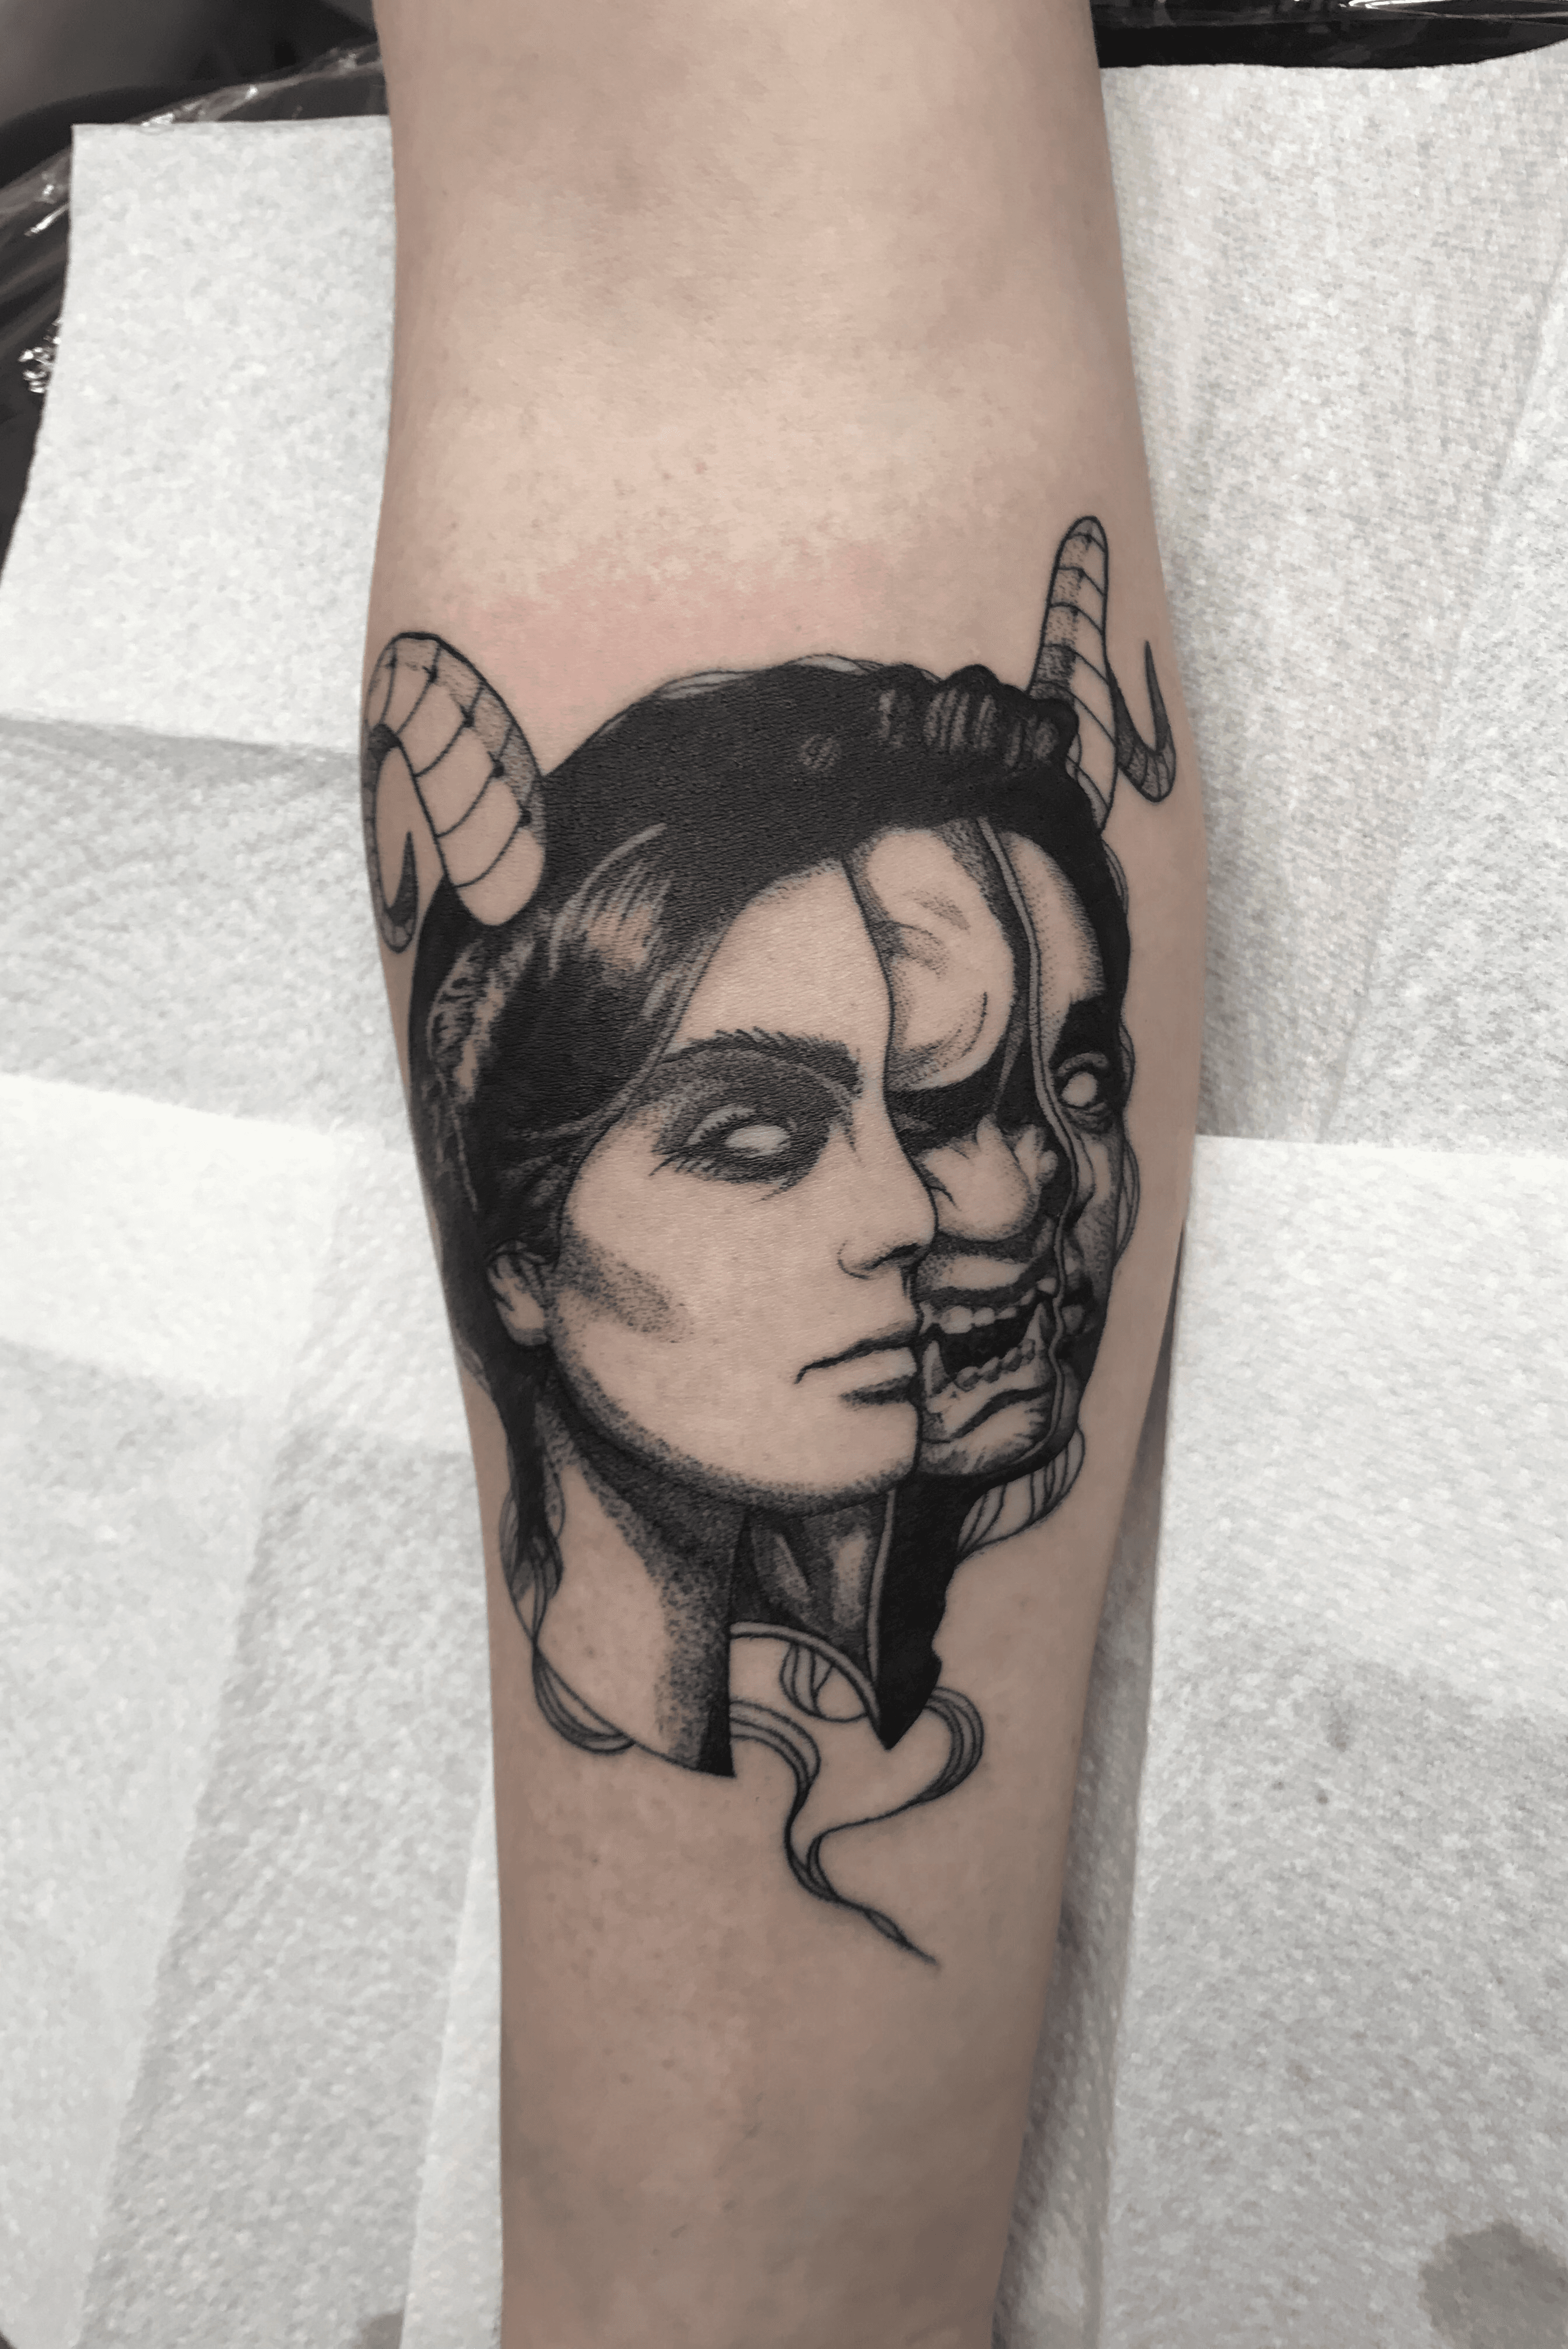 Two face tattoo girl